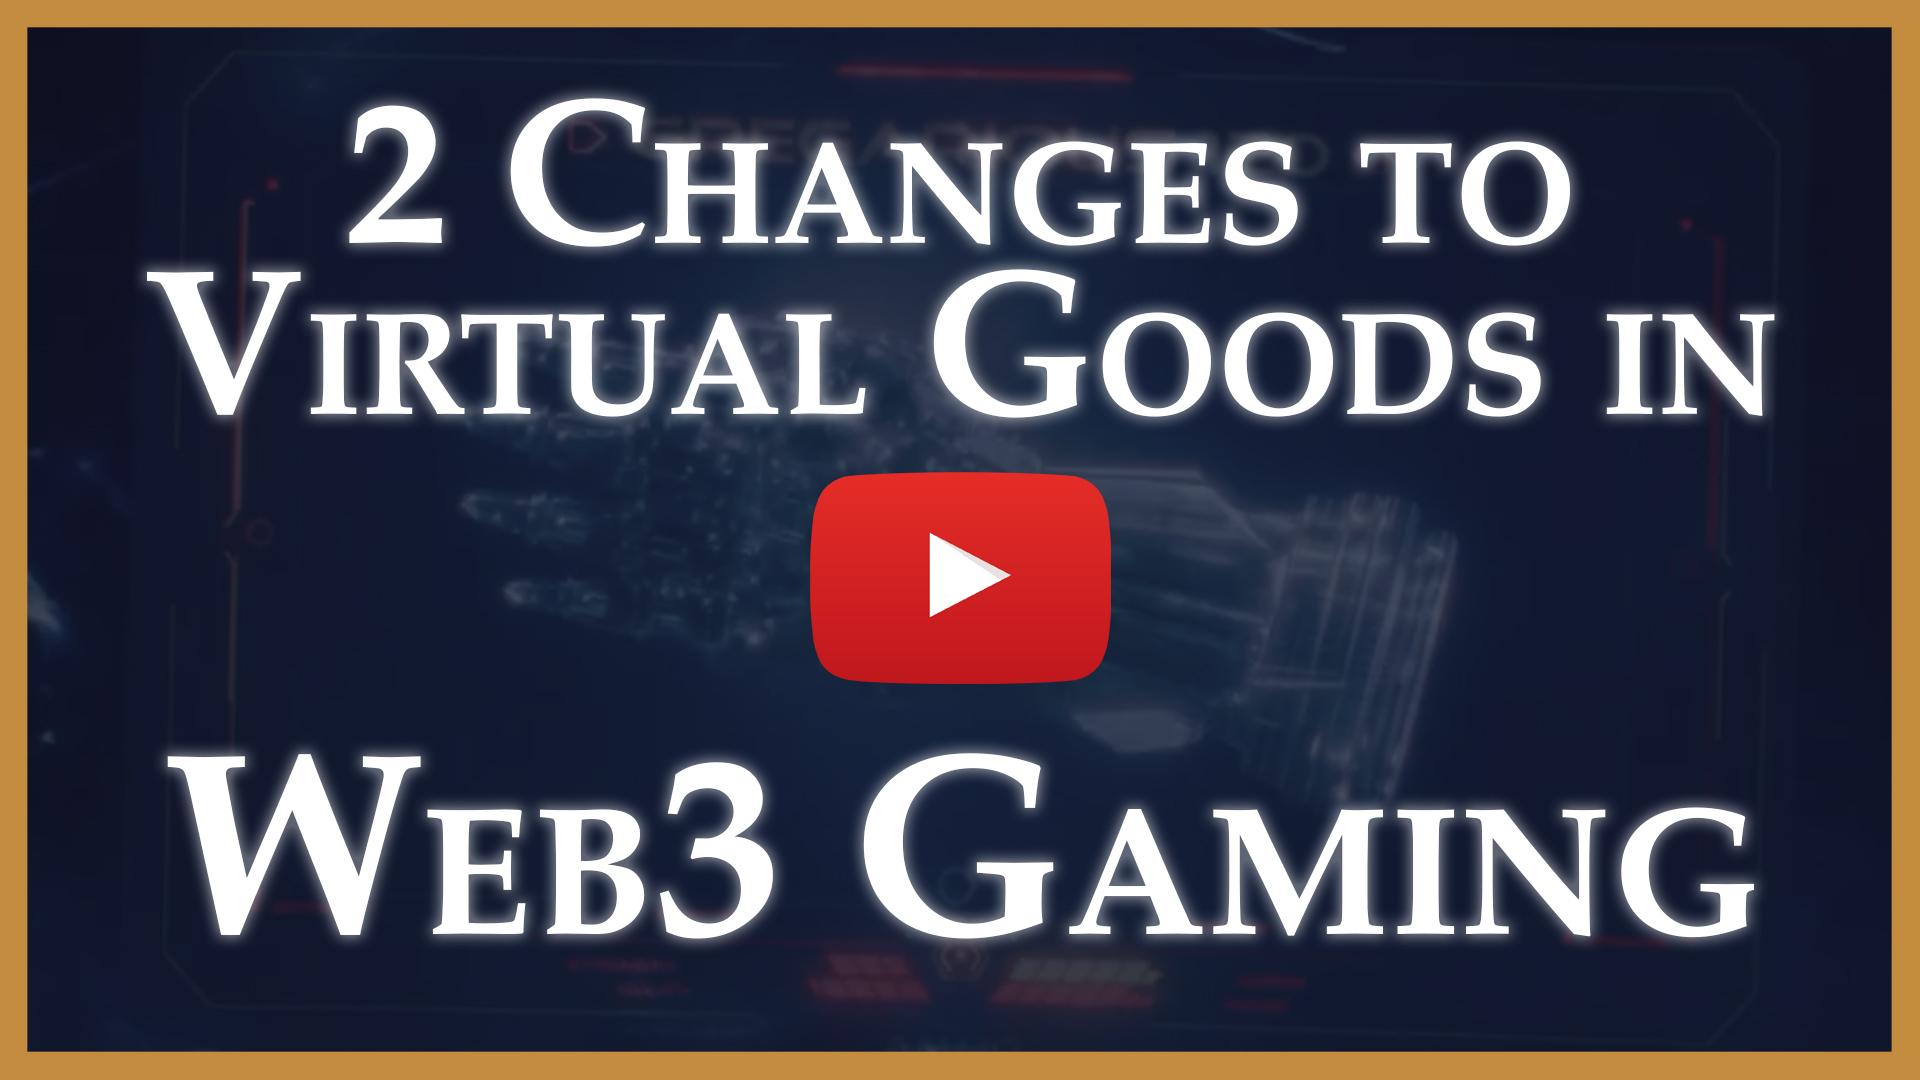 2 Changes to Virtual Goods in Web3 Gaming